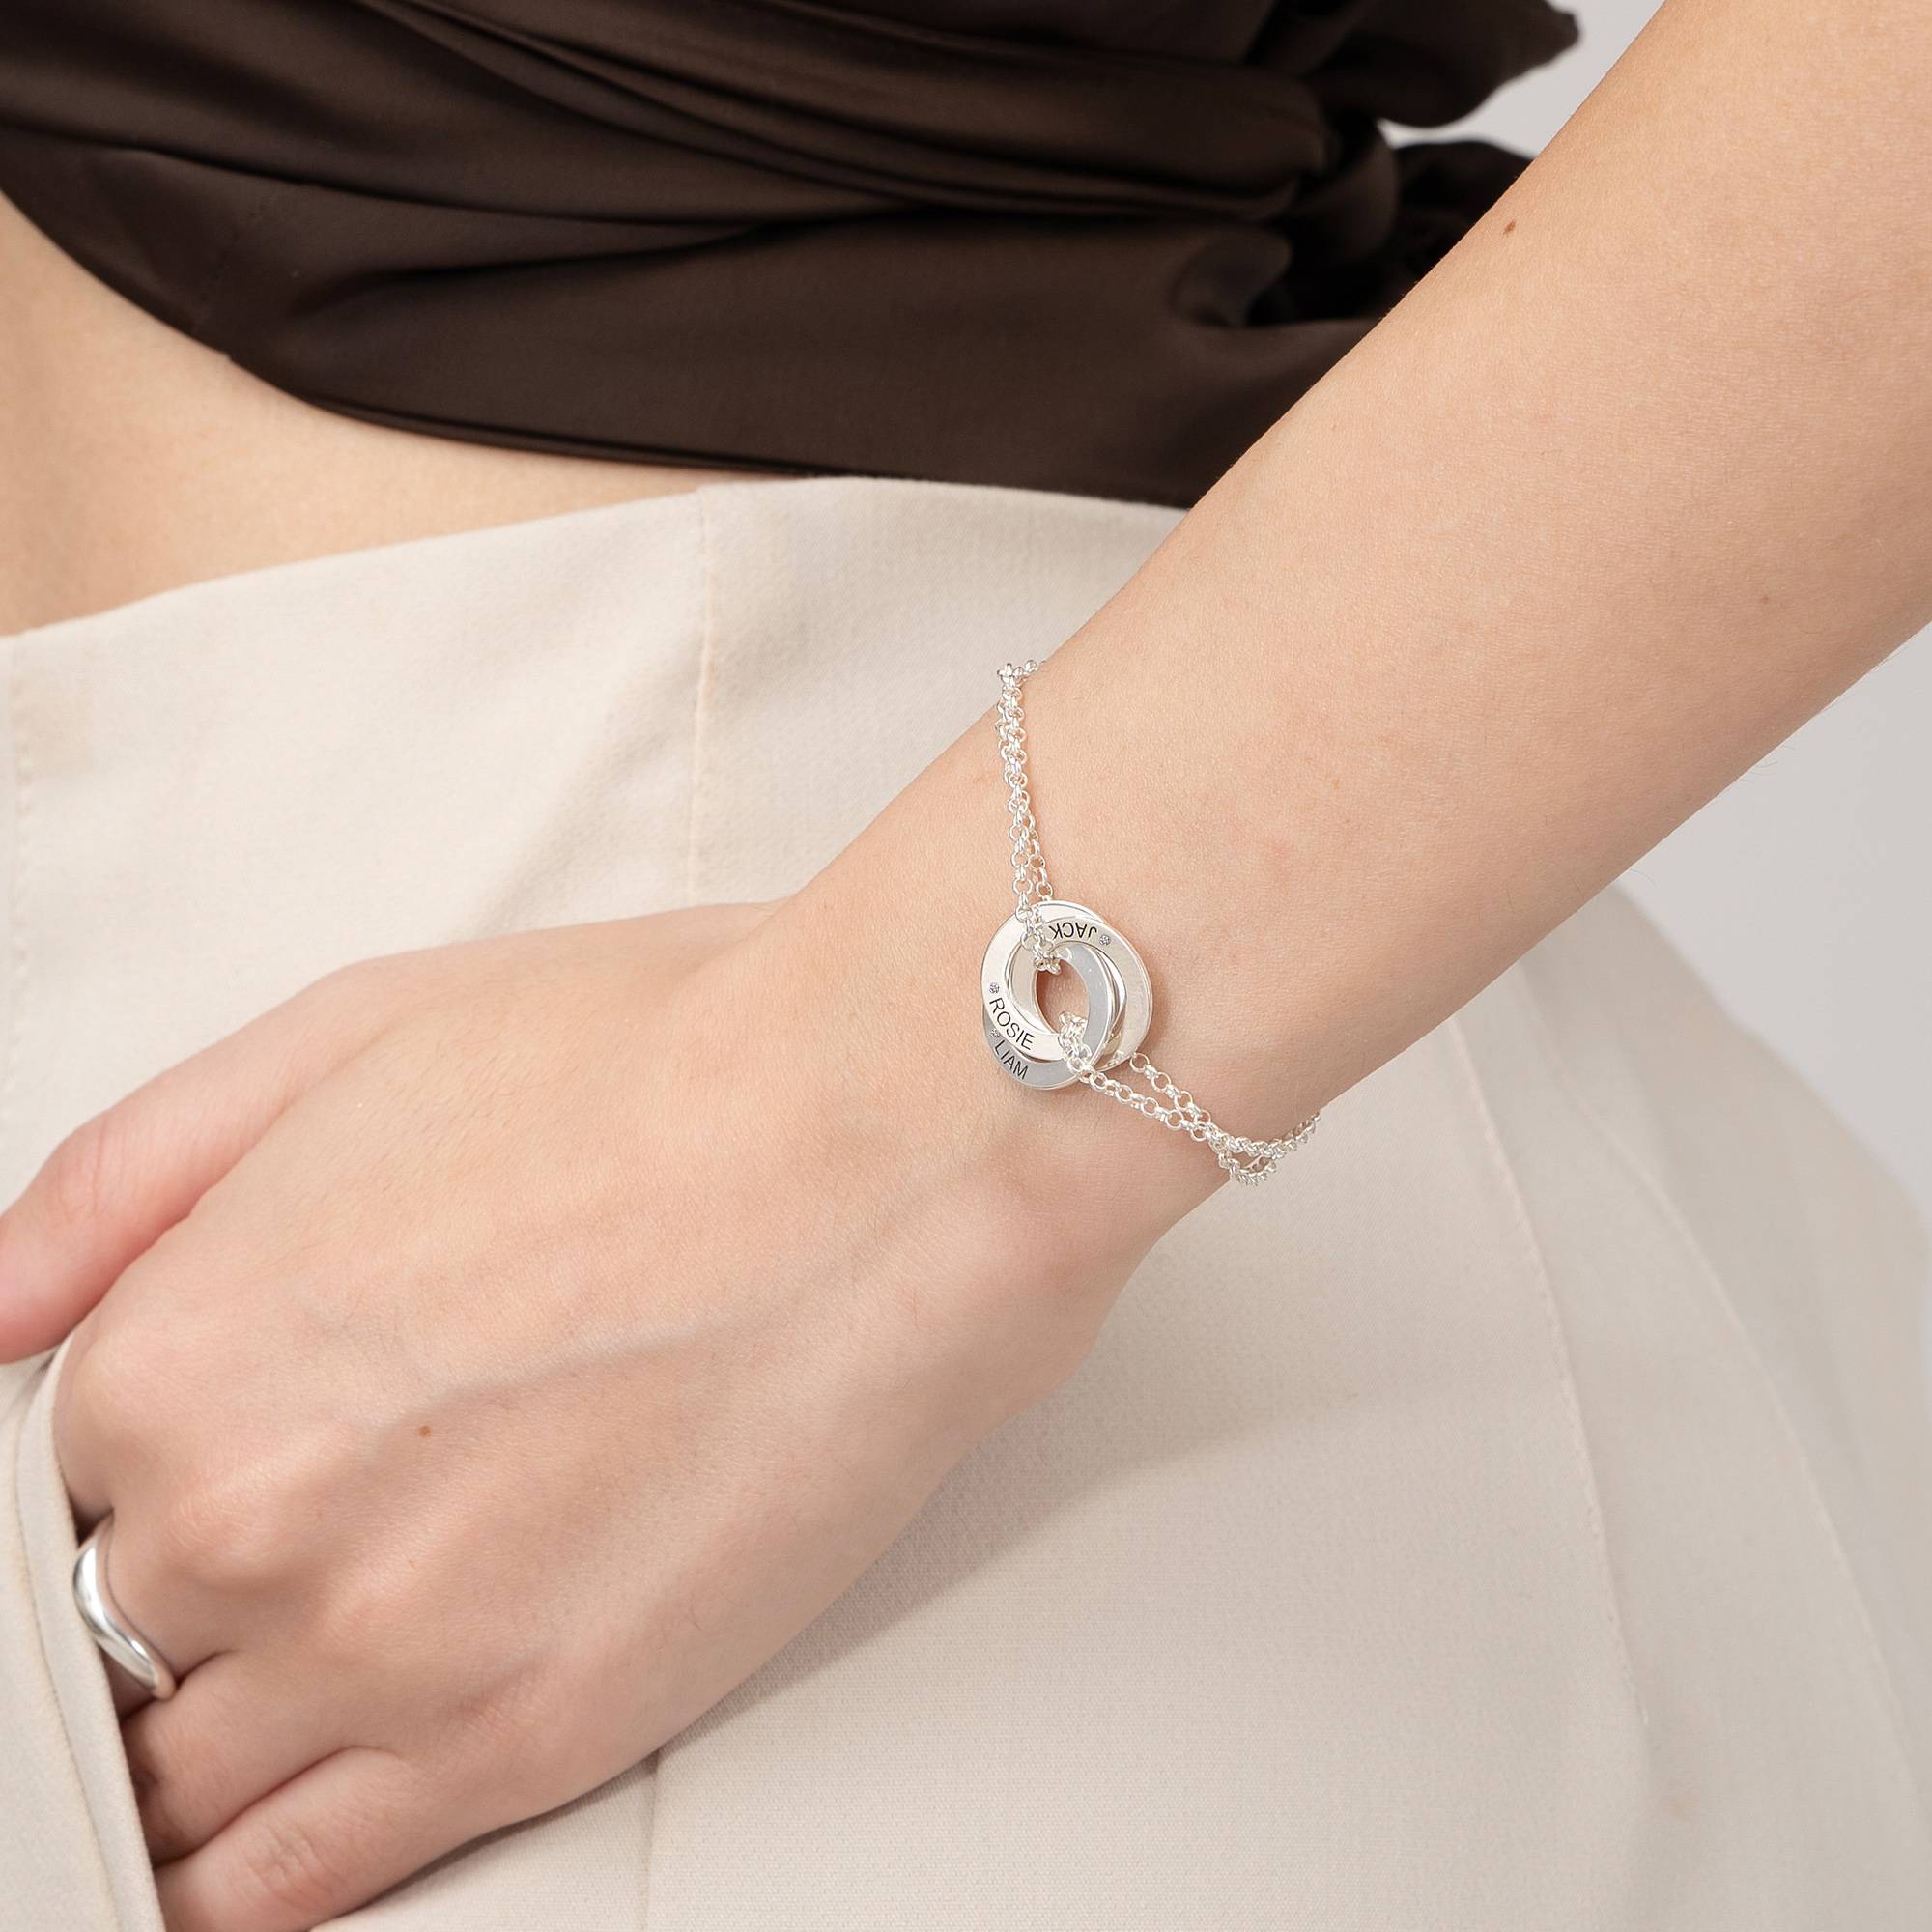 Lucy Russische Ring Armband met Diamant in Sterling Zilver-5 Productfoto